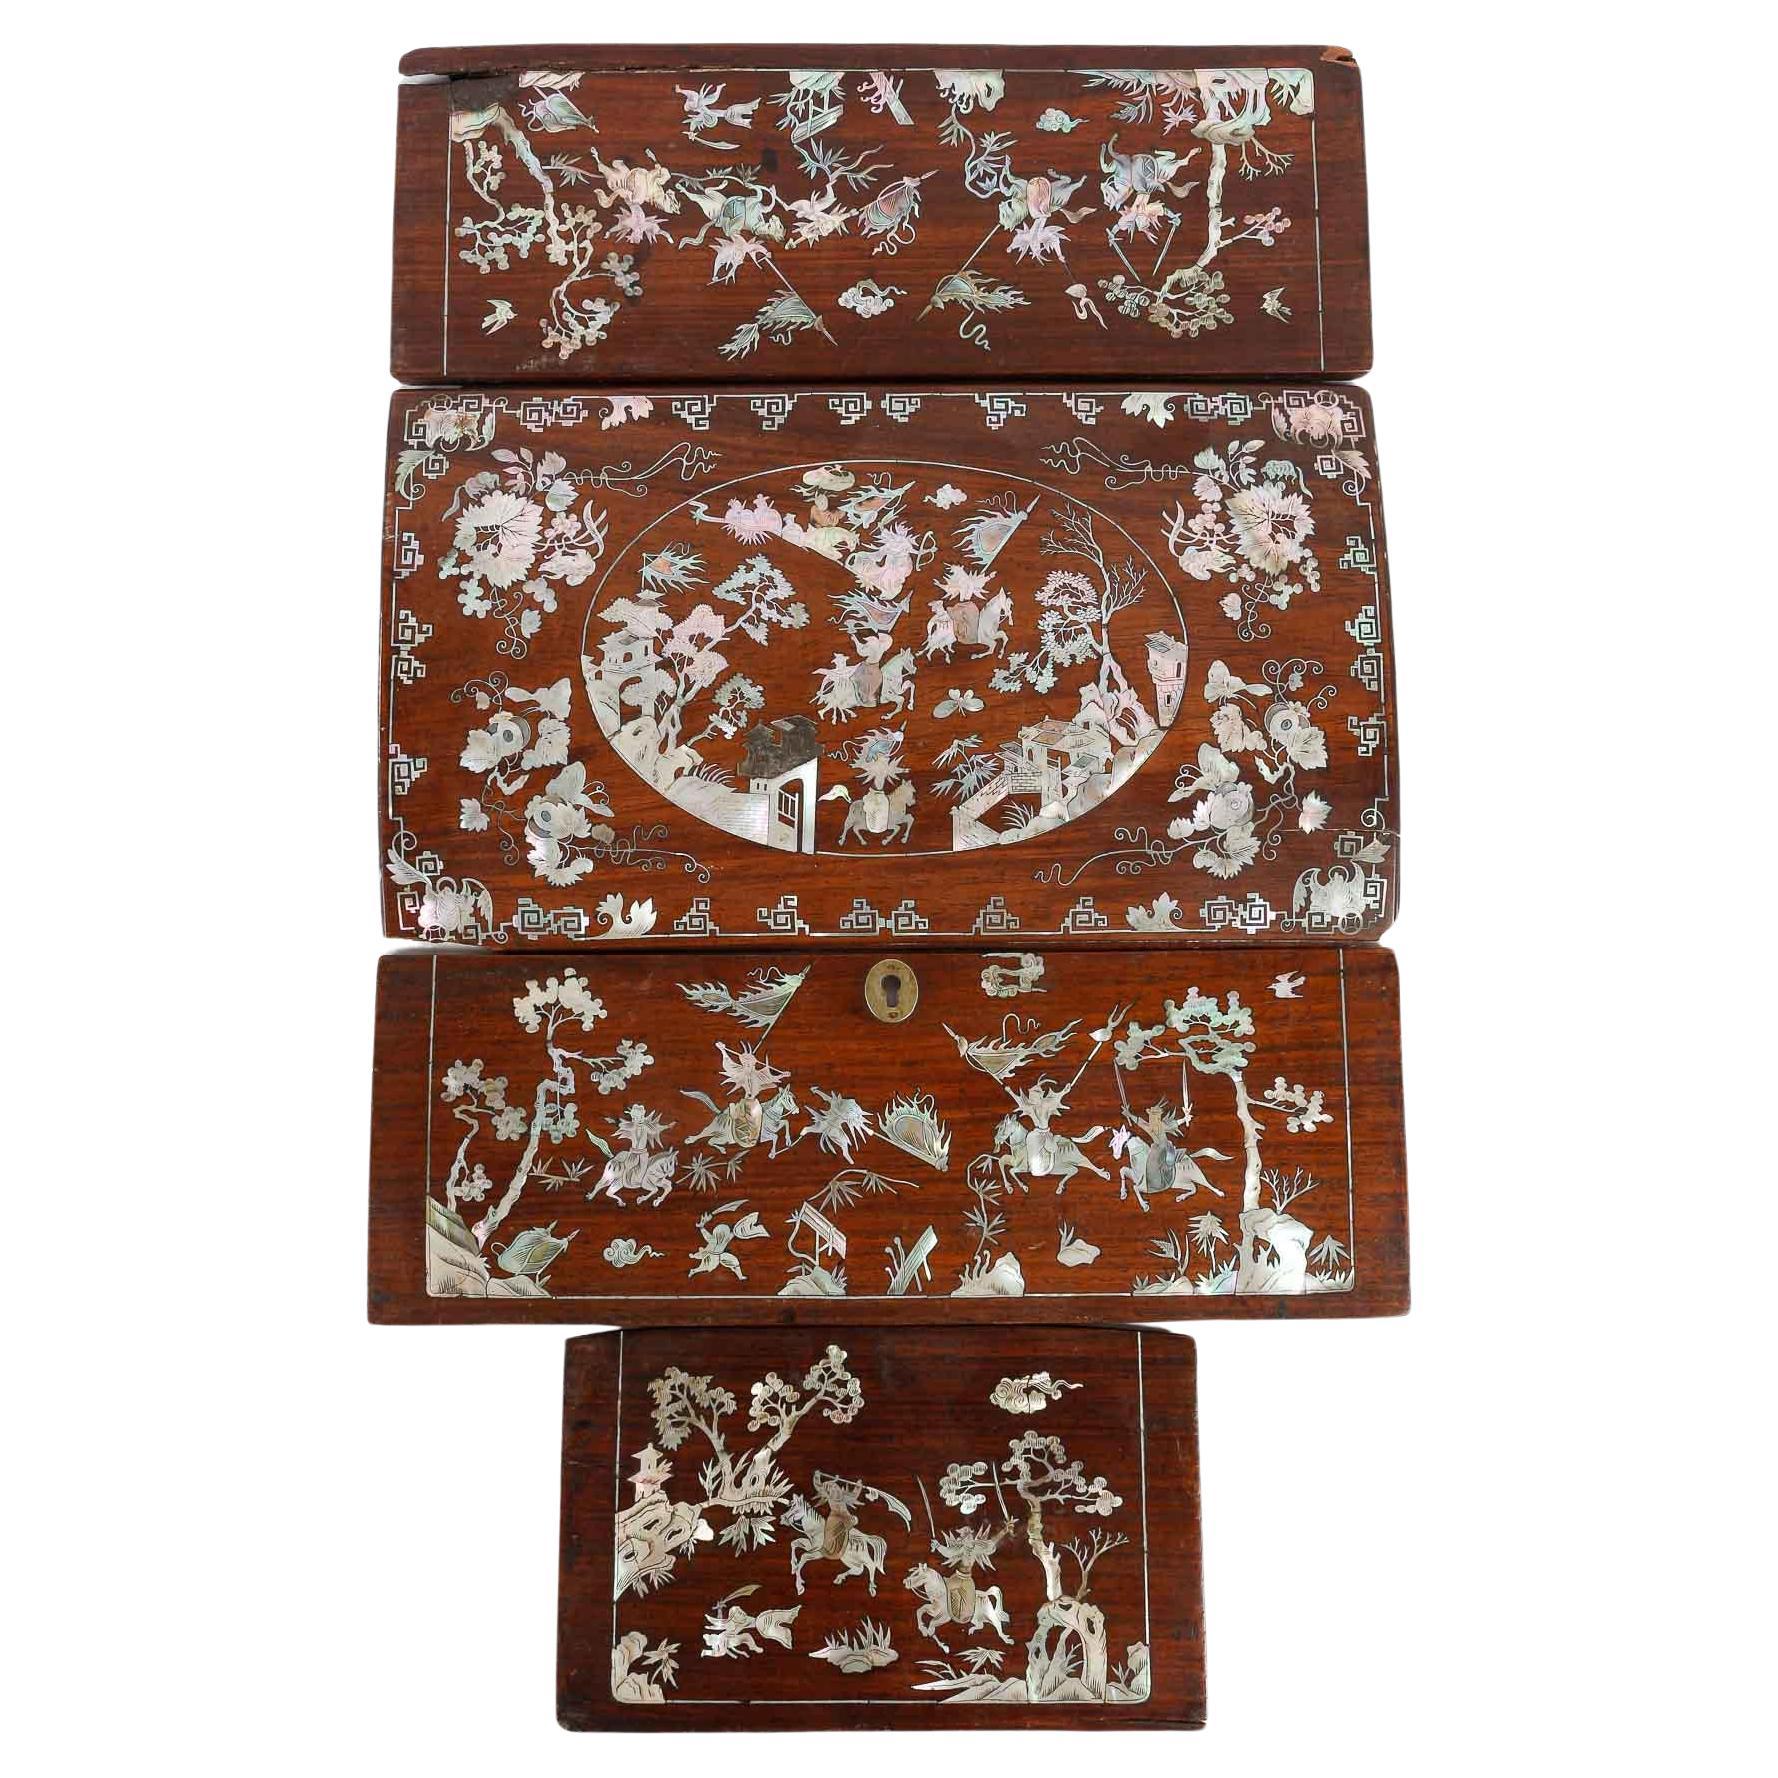 4 Panels of a Wooden Box with Mother of Pearl Inlay, Chinese Scenes.